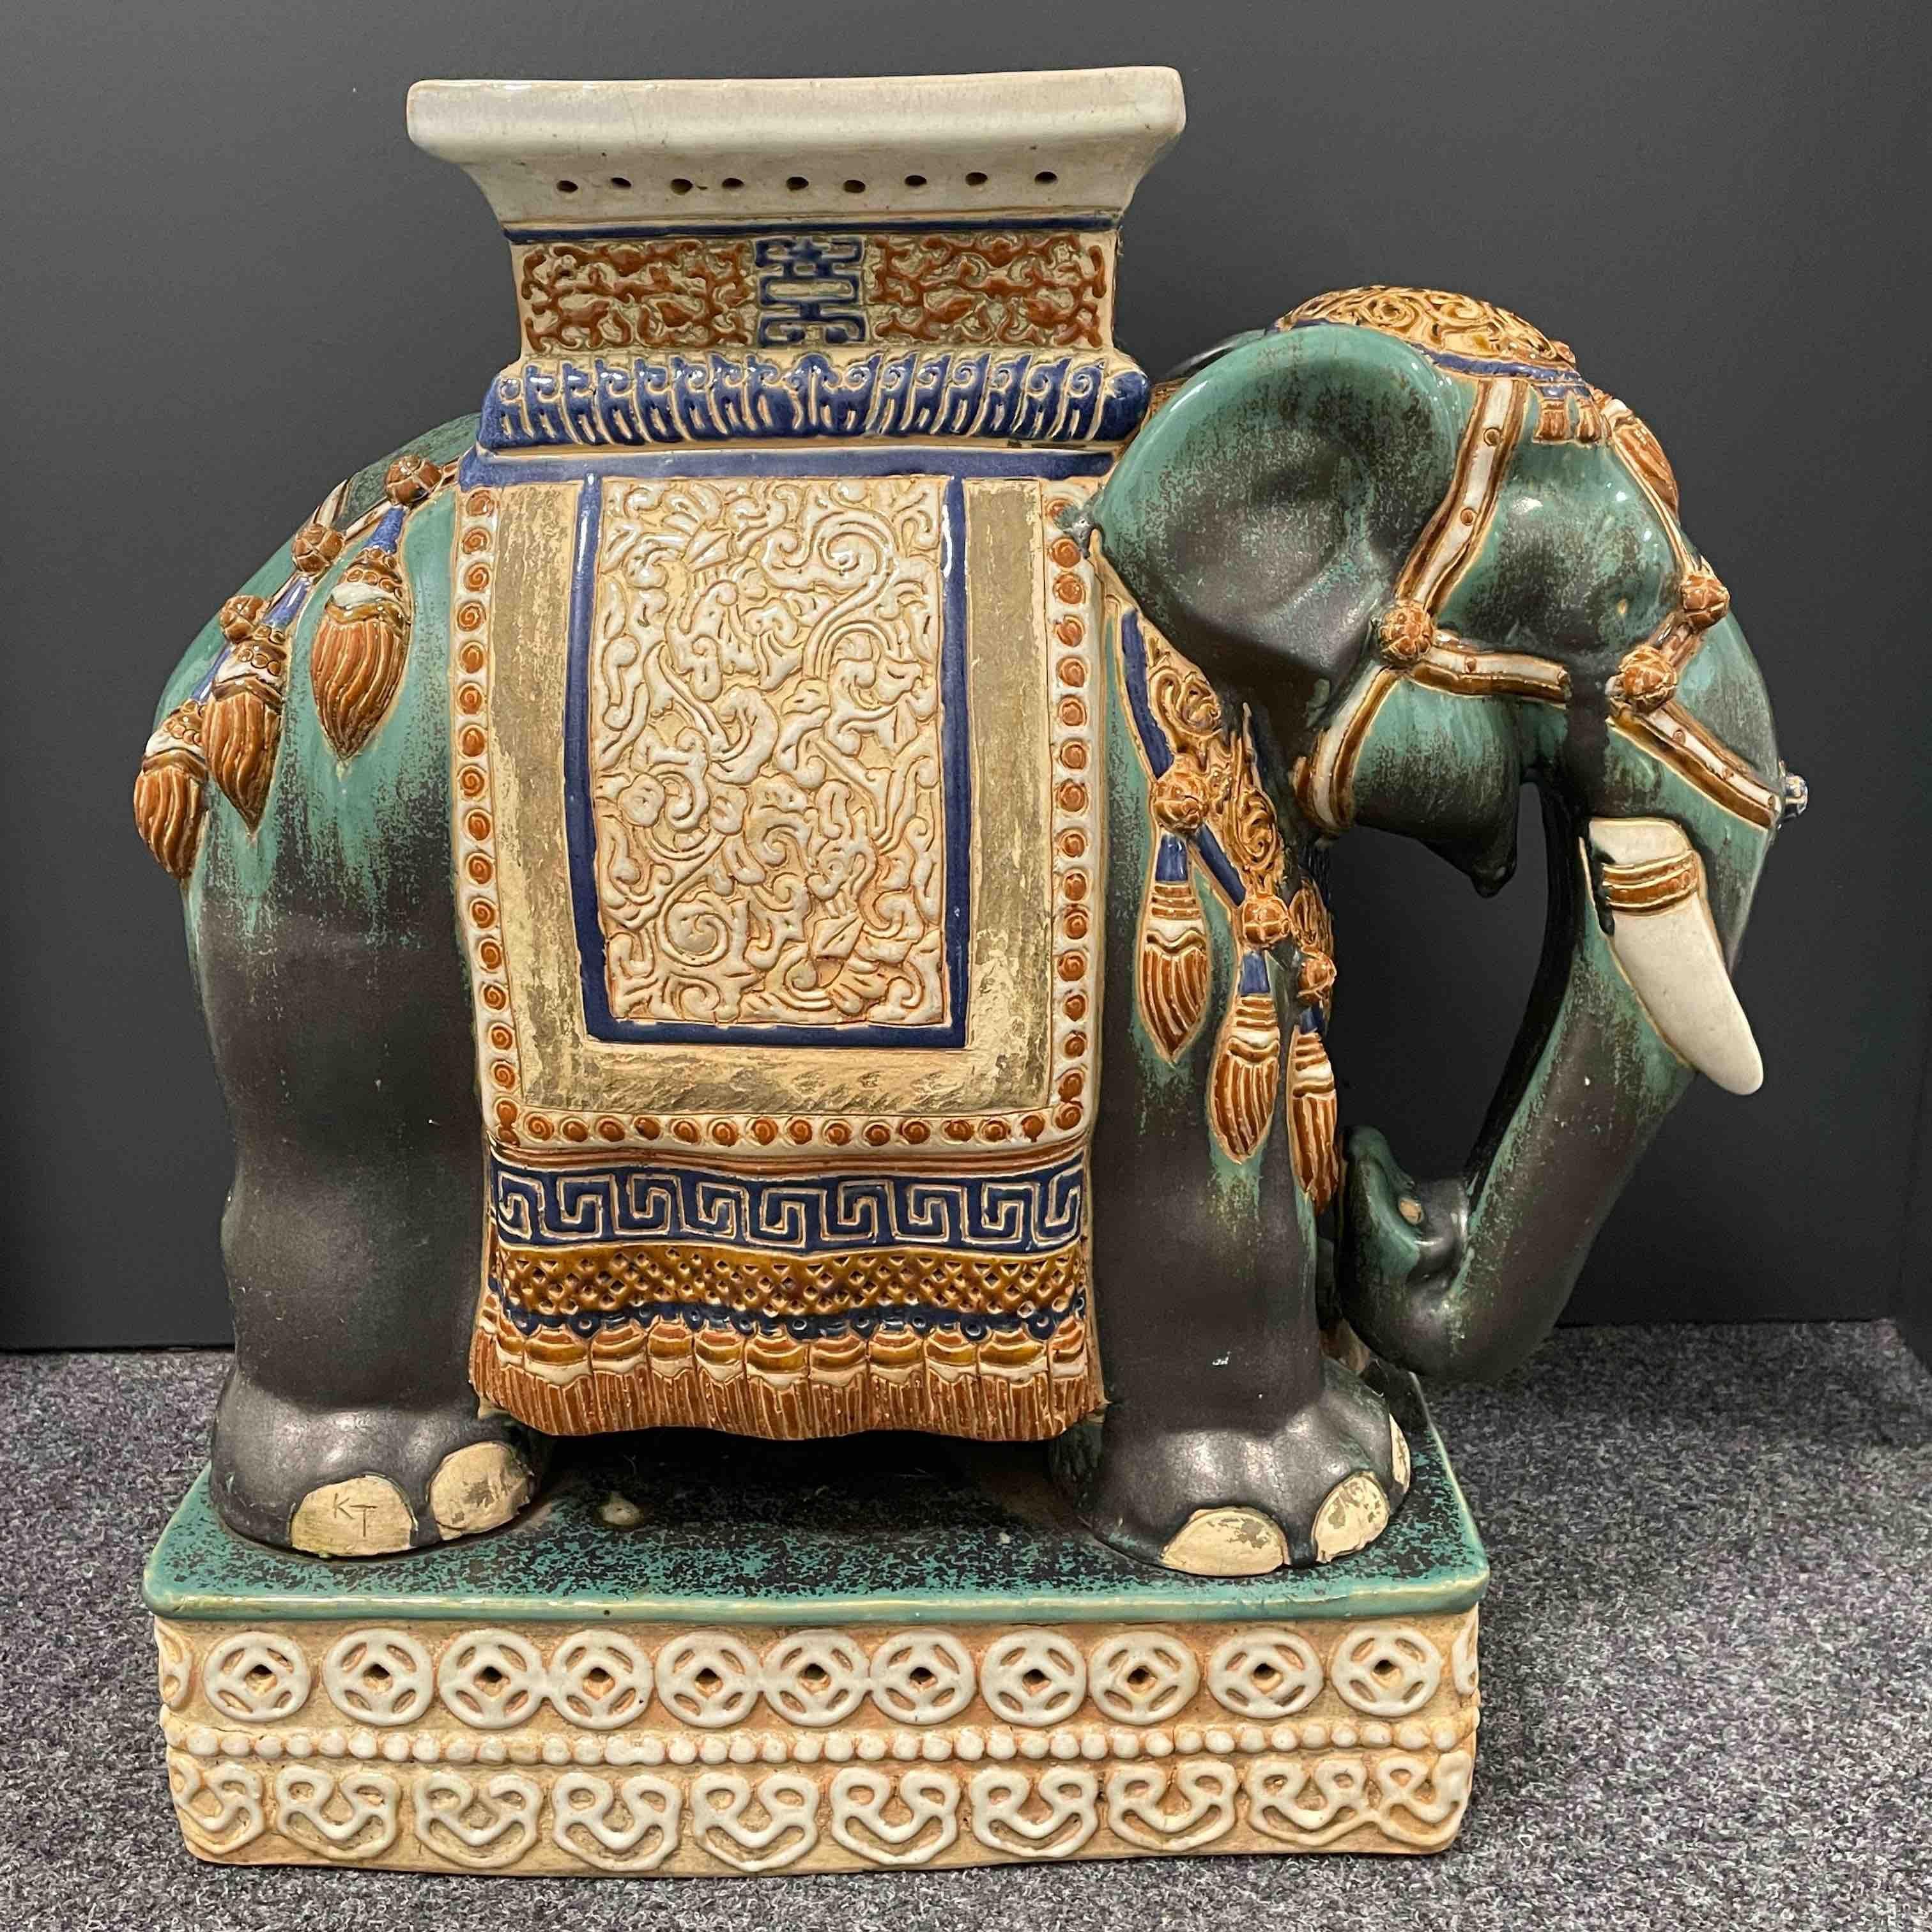 Ceramic Stunning Gorgeous Hollywood Regency Chinese Elephant Garden Plant Stand or Seat